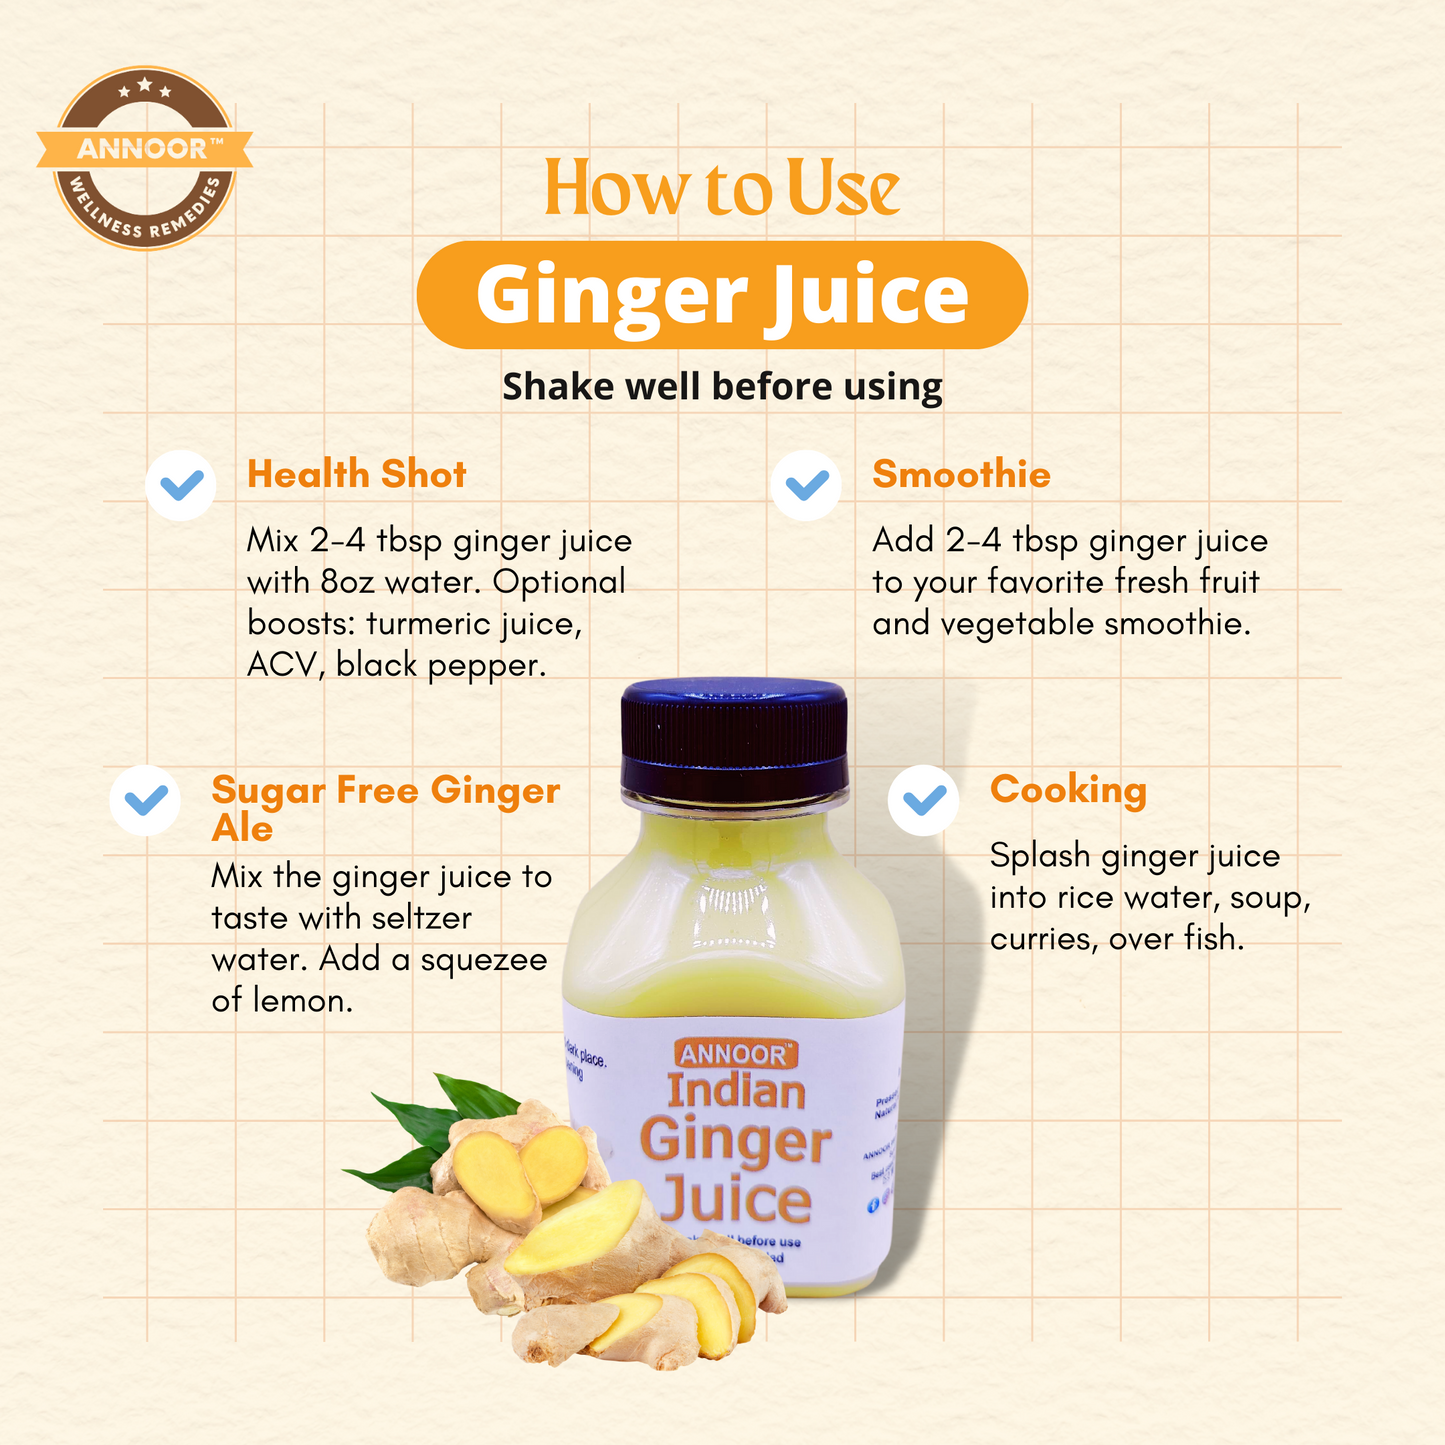 Organic Ginger Juice by Annoor | 32/8.5 Fl Oz | NFC | Raw, Strong, Concentrate and No pulp. Use for Spicy, Zesty & warming kick, Soothing & refreshing ginger tea, marinade, sauces, refreshing lemonade